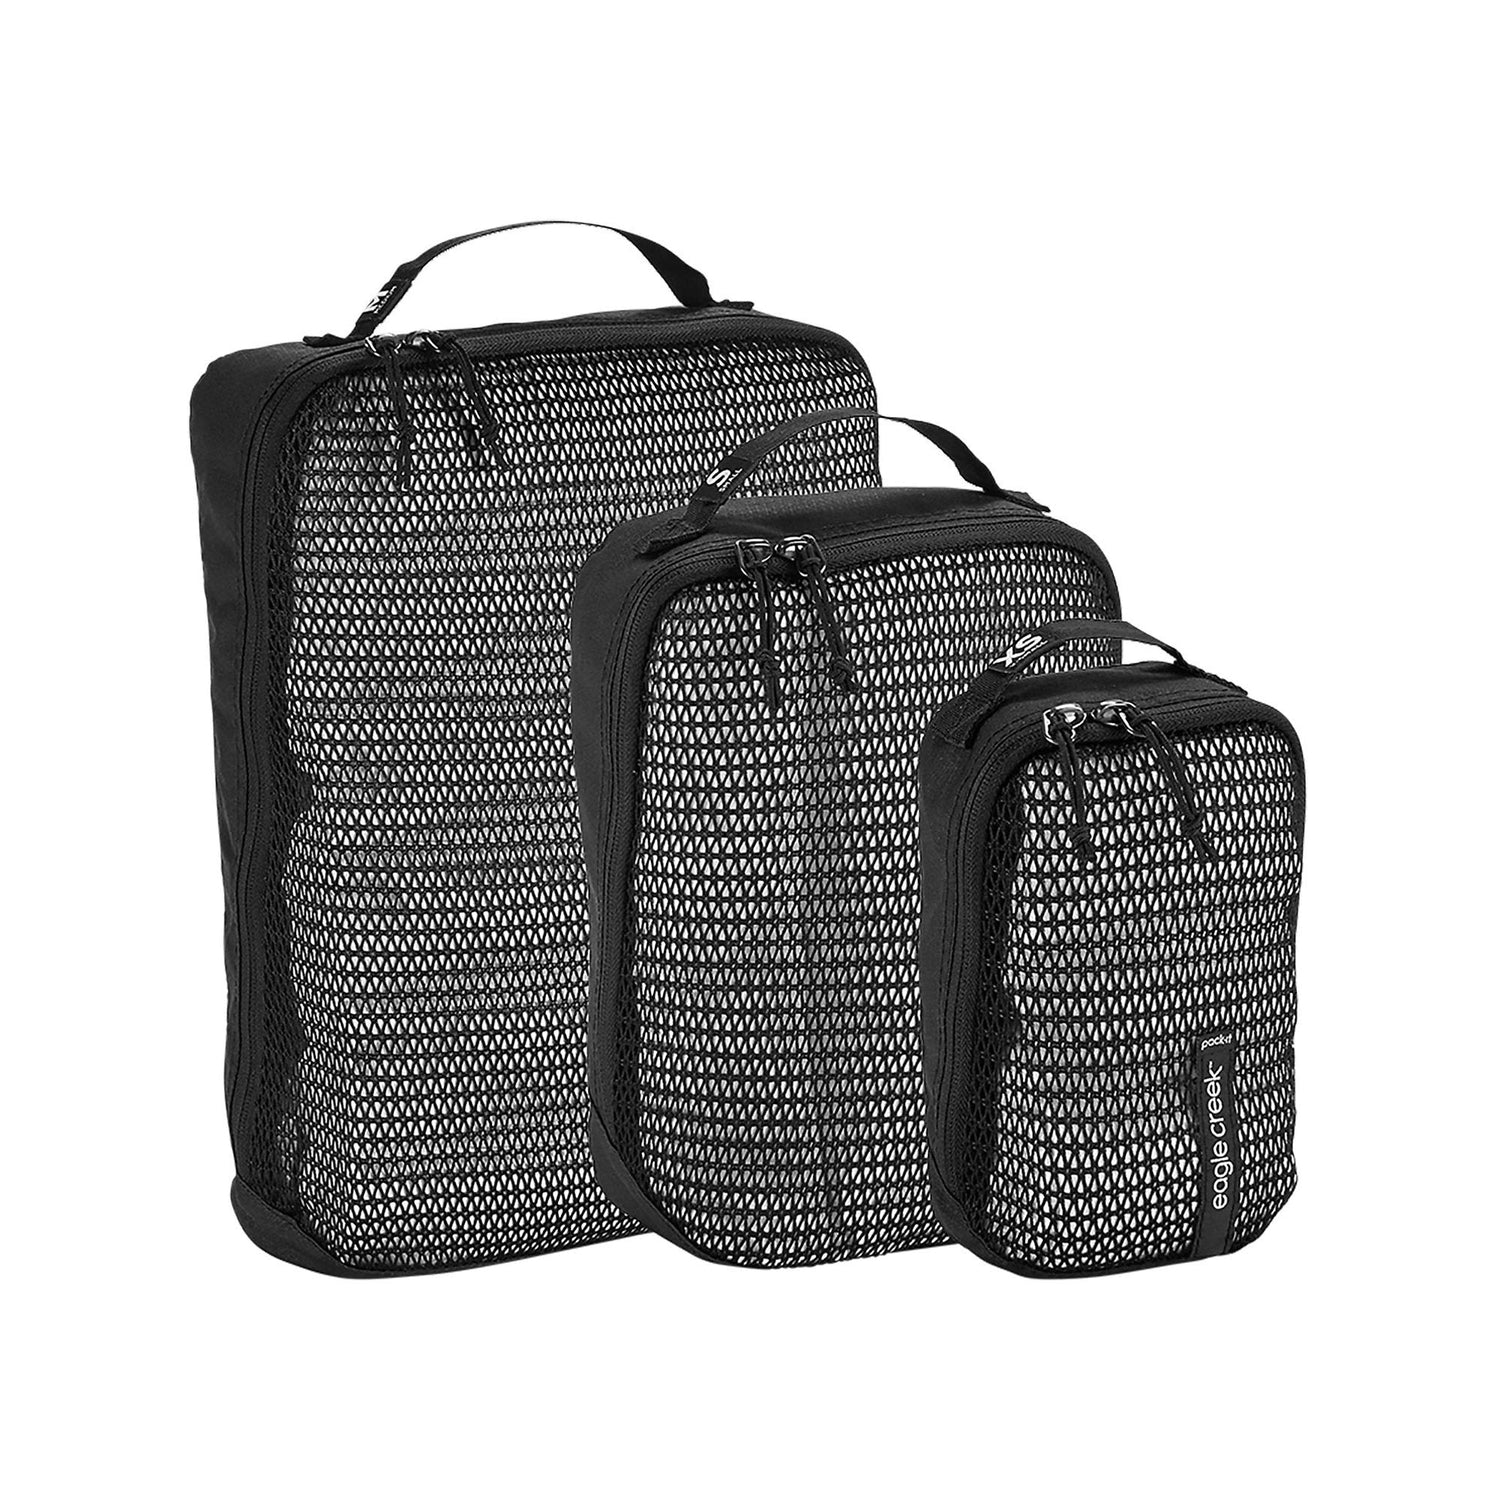 The Packing Cubes in Black